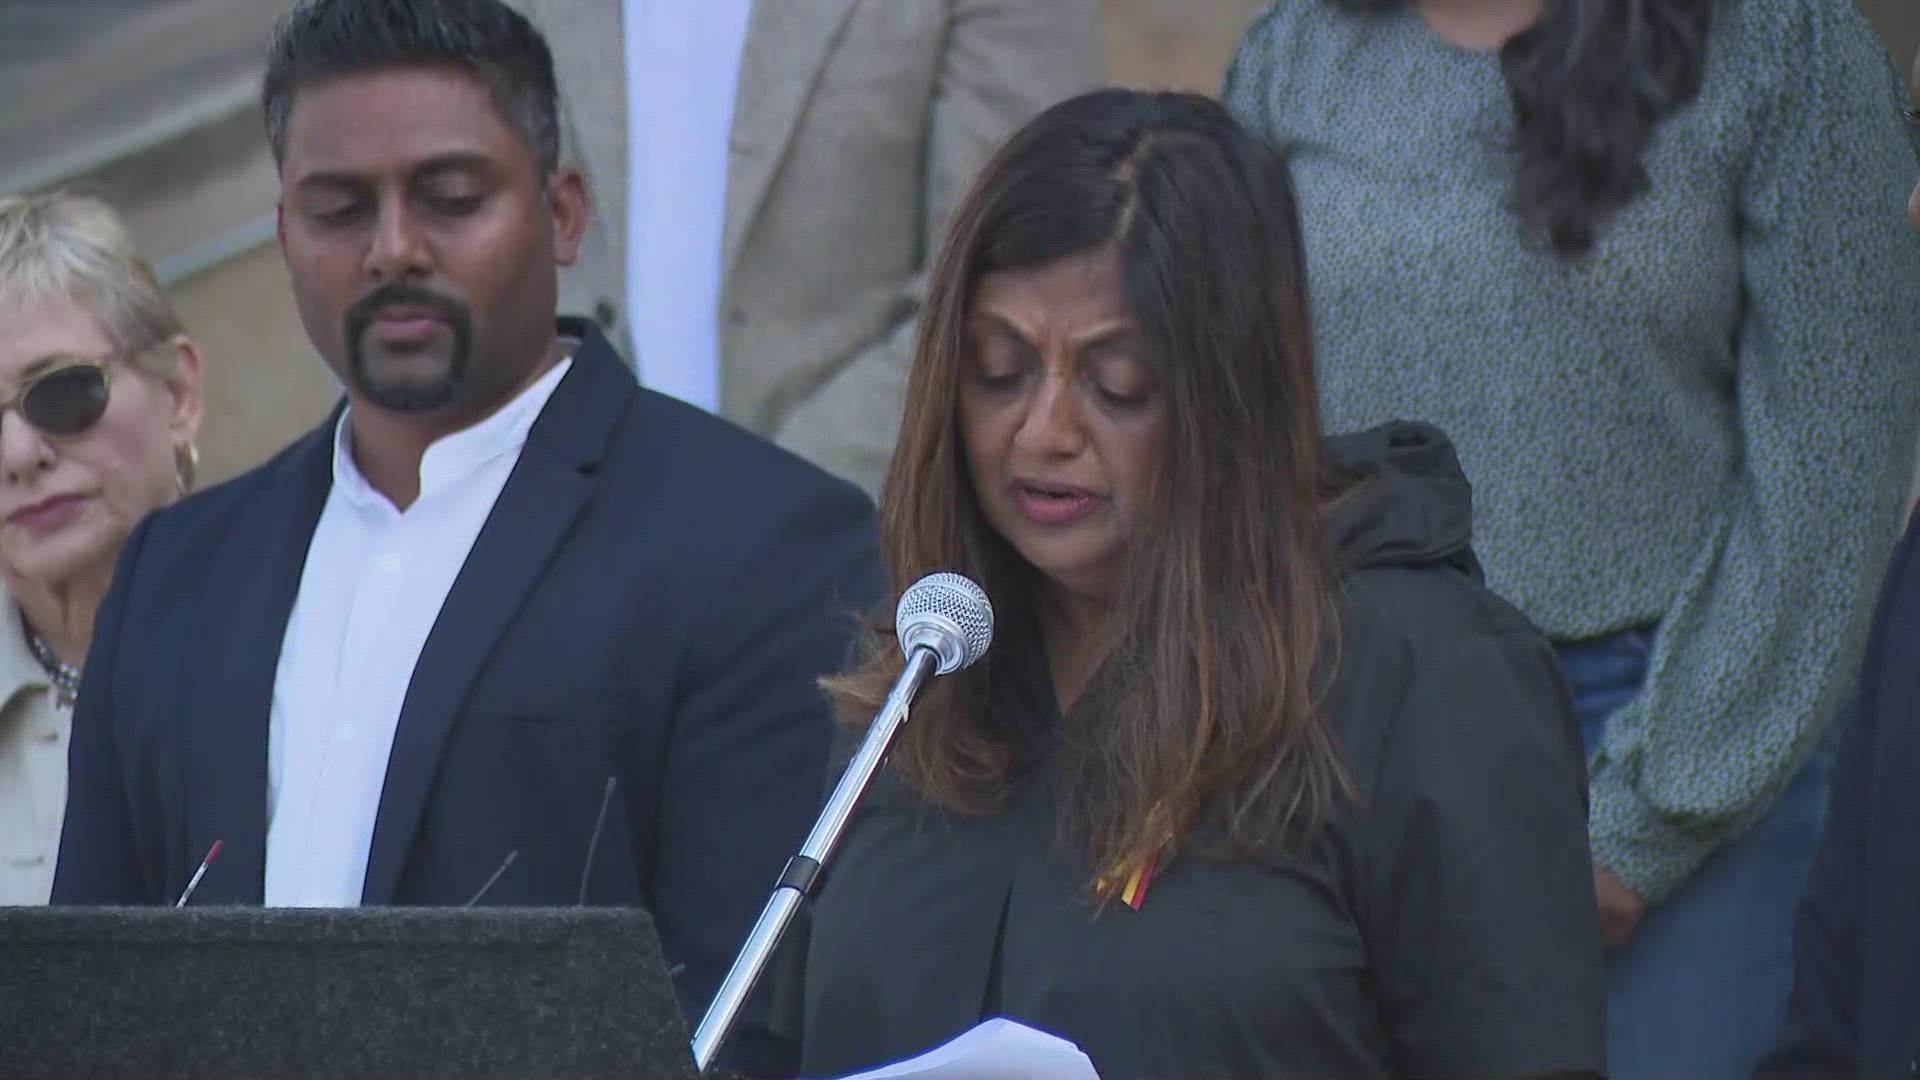 The family of Rajan Moonesinghe – who was shot and killed by an Austin police officer last year – held a press conference Tuesday morning.